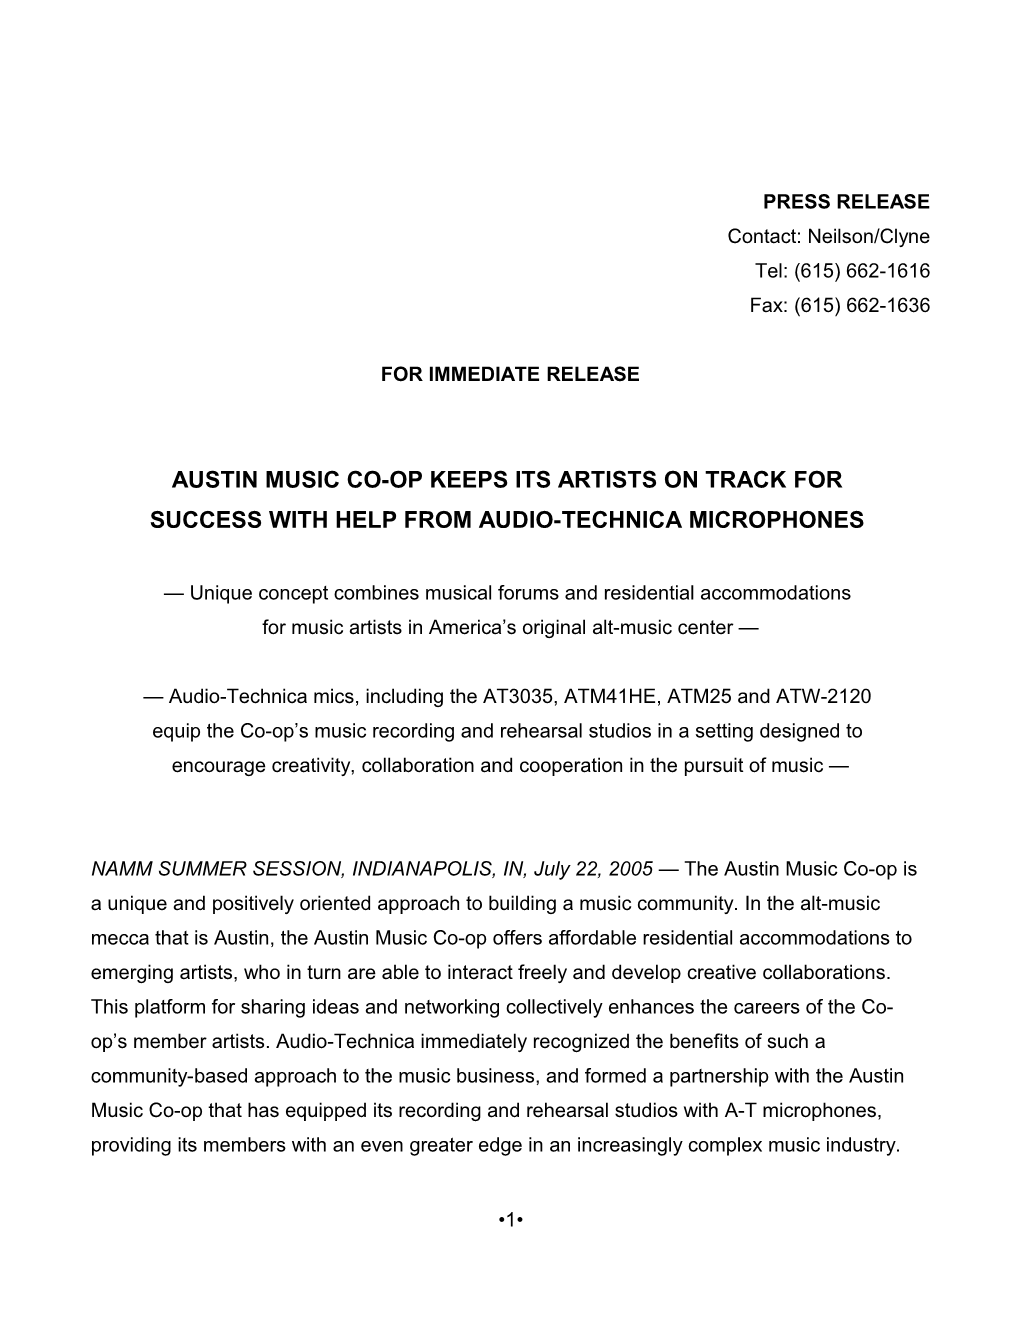 Austin Music Co-Op Keeps Its Artists on Track For